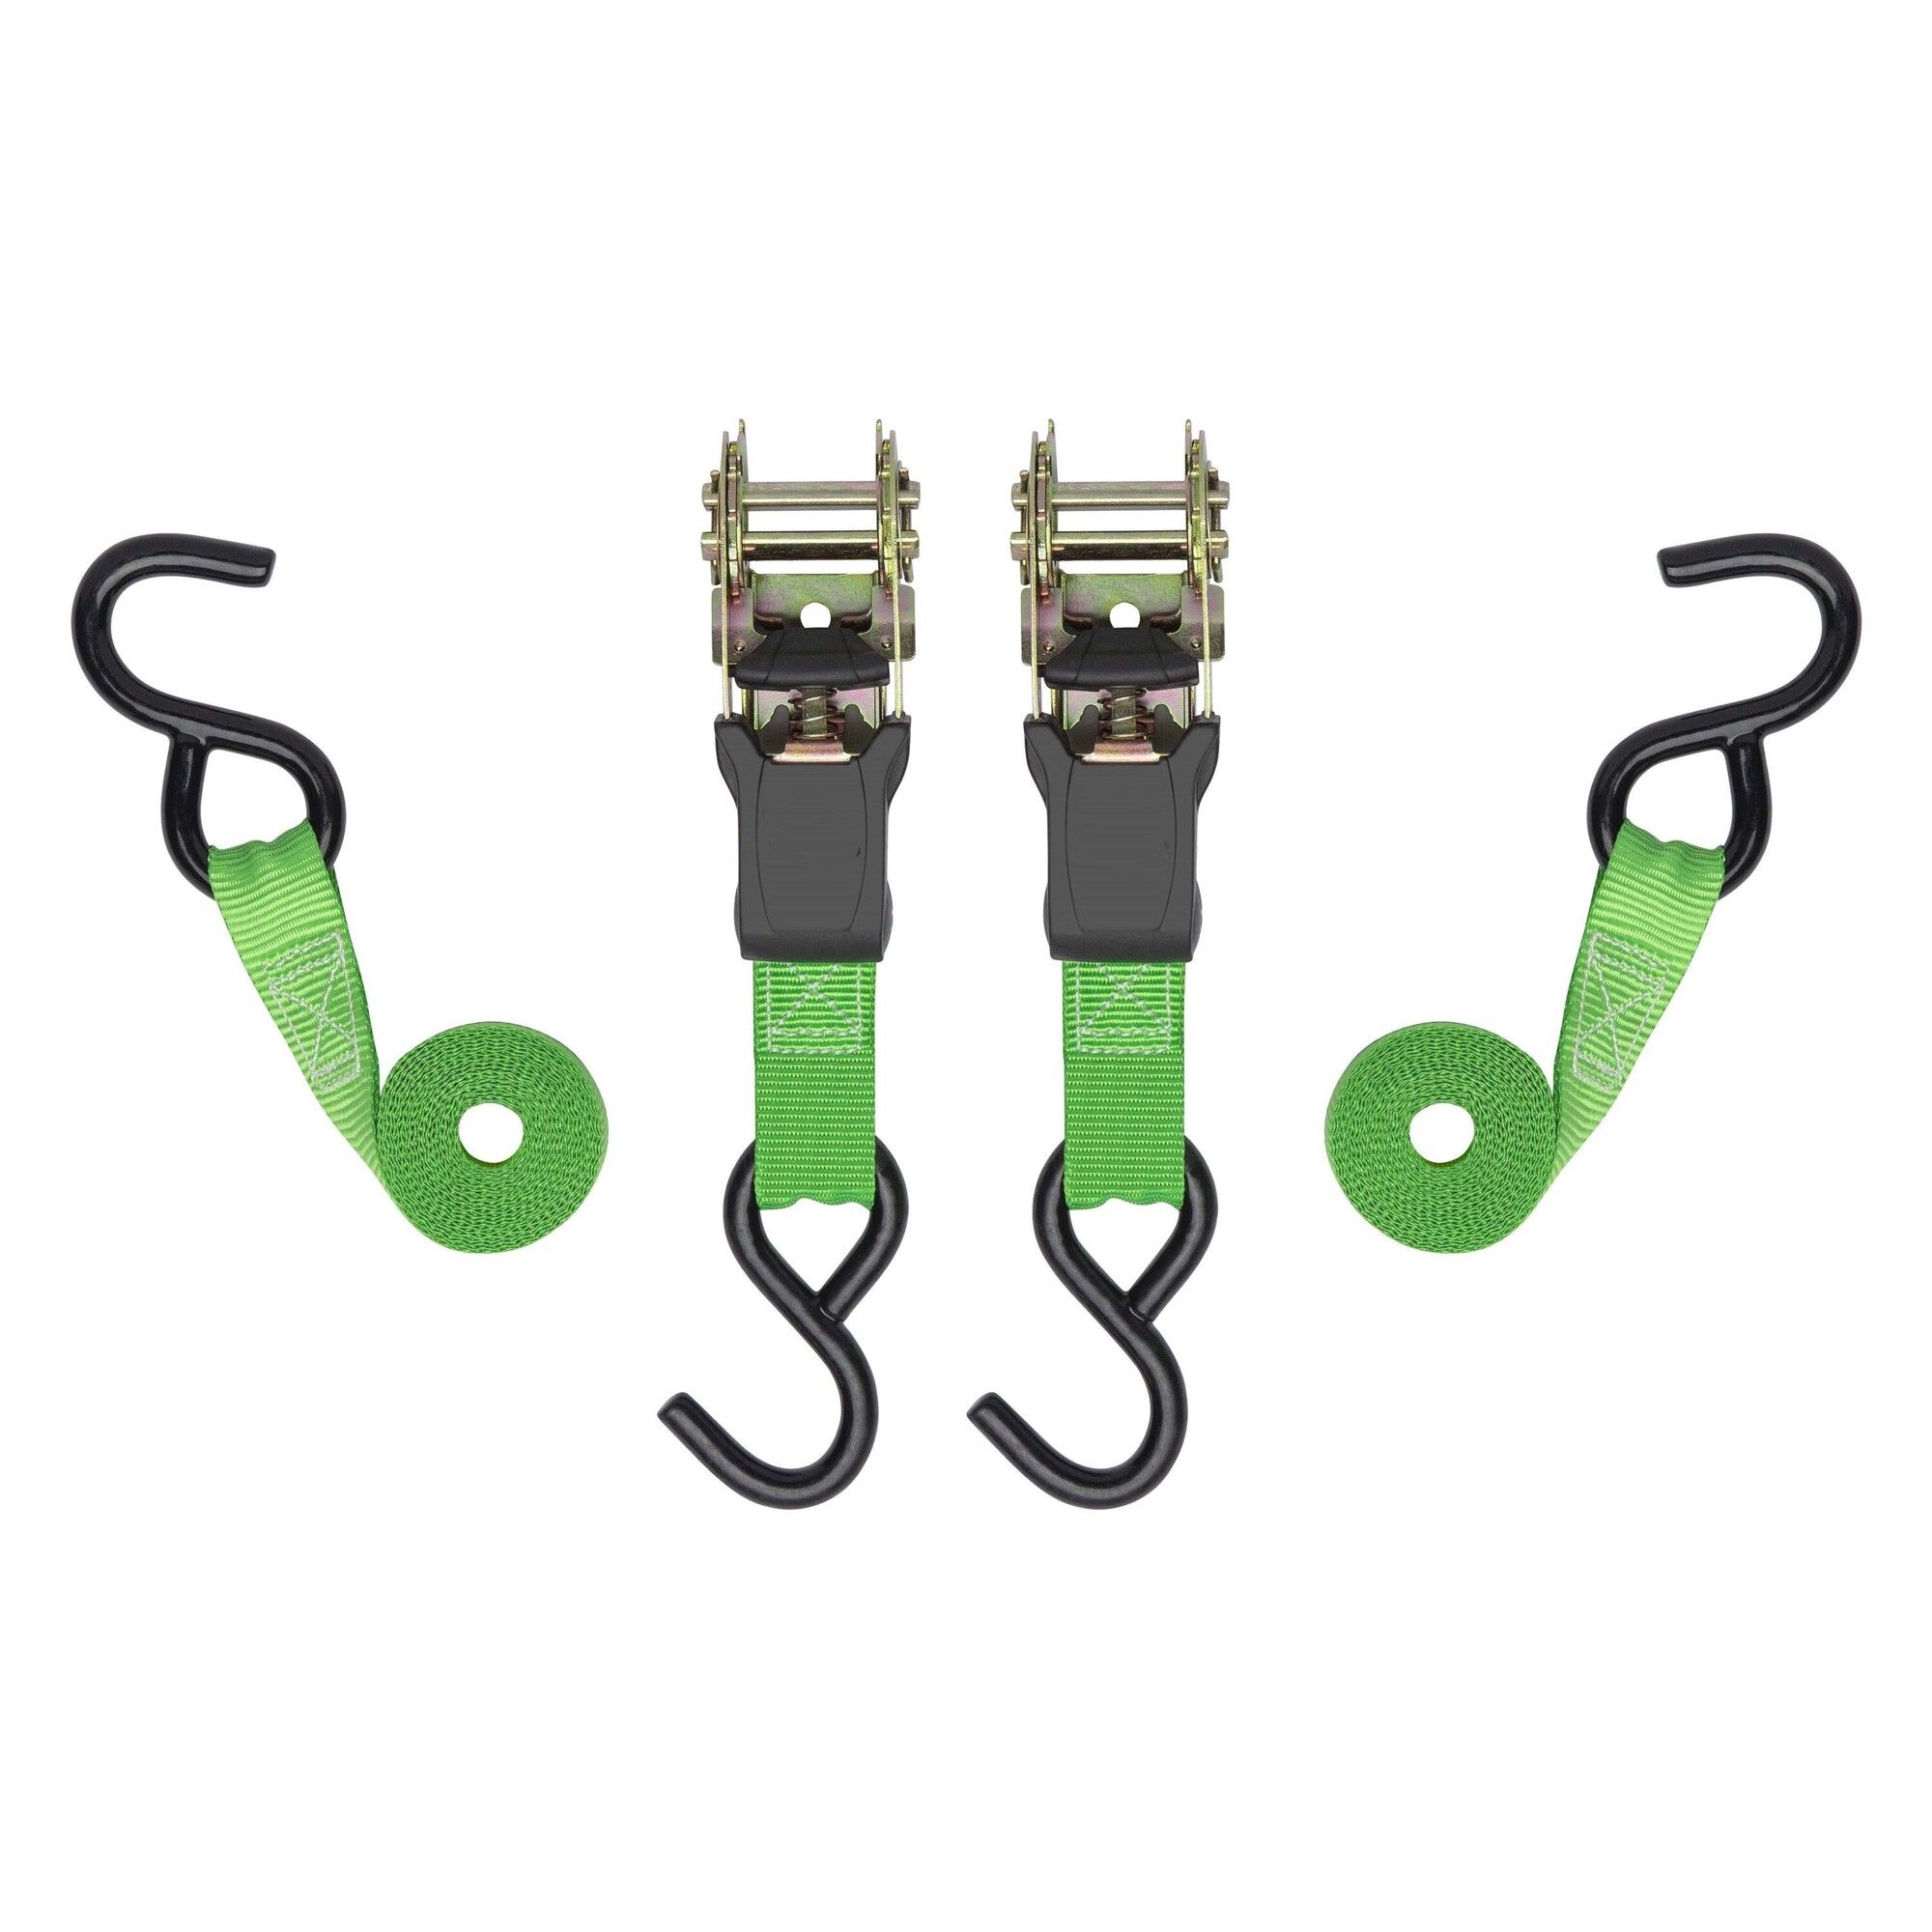 Ultra-Tow 2-Pack Padded Ratchet Tie-Downs, 500-lb. Working Load, 1500-lb. Capacity, 6ft.L, Green Polyester, Model 9299